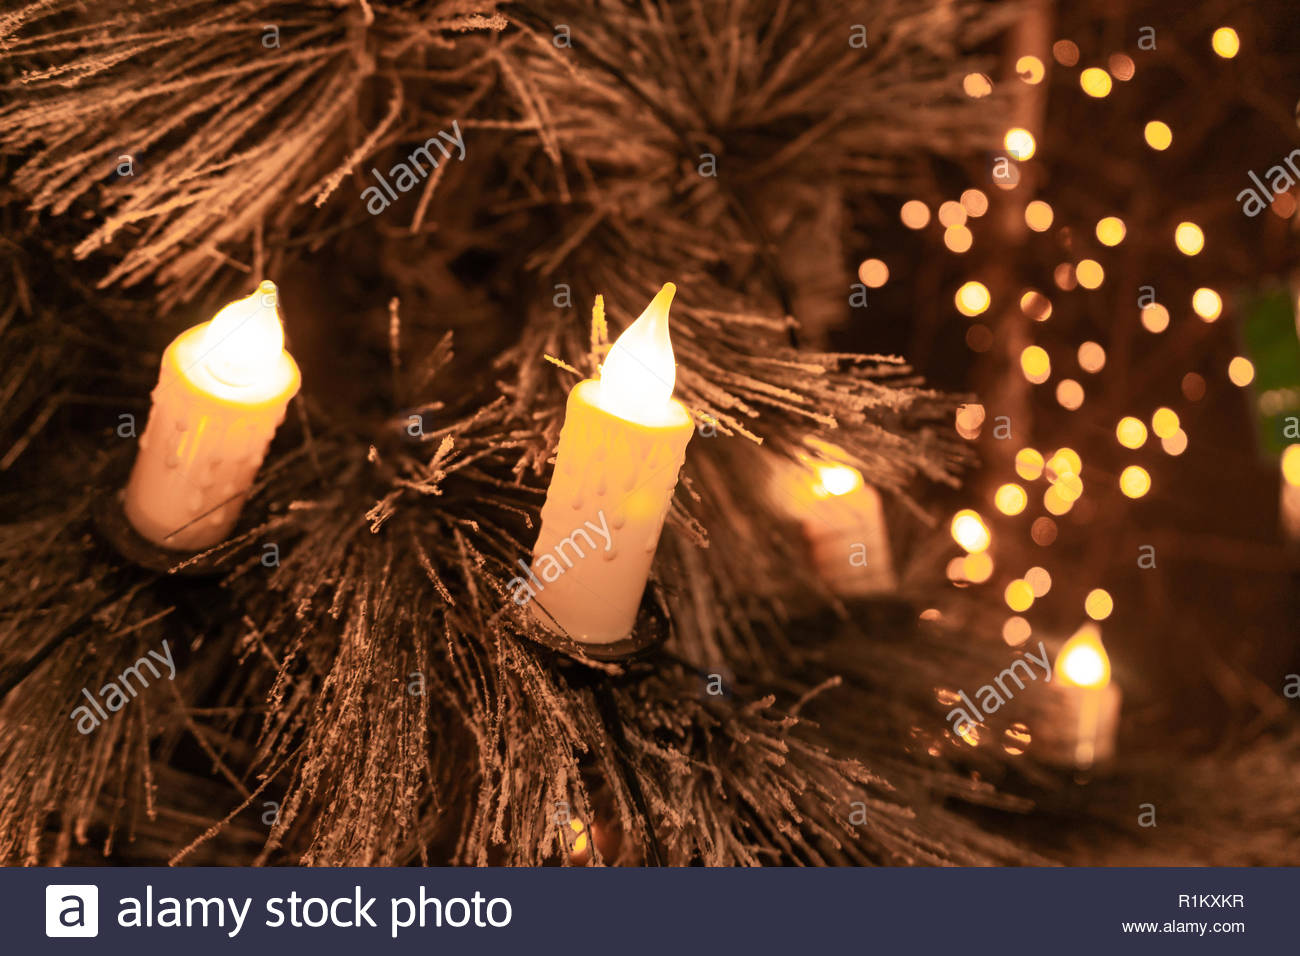 Traditional Candles On Flocked Christmas Tree With Glowing Lights